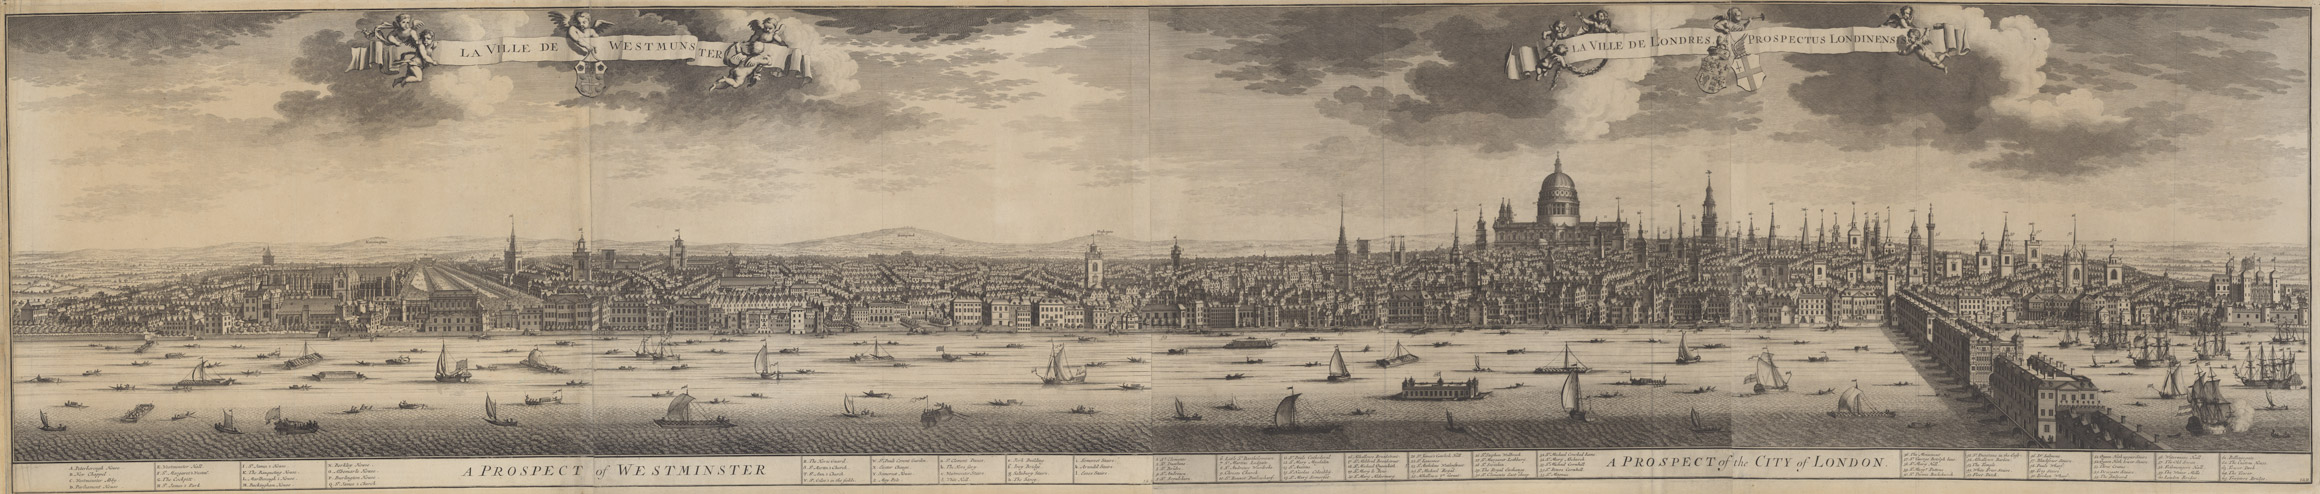 Engraving of a view of Westminster and London in the early 18th century